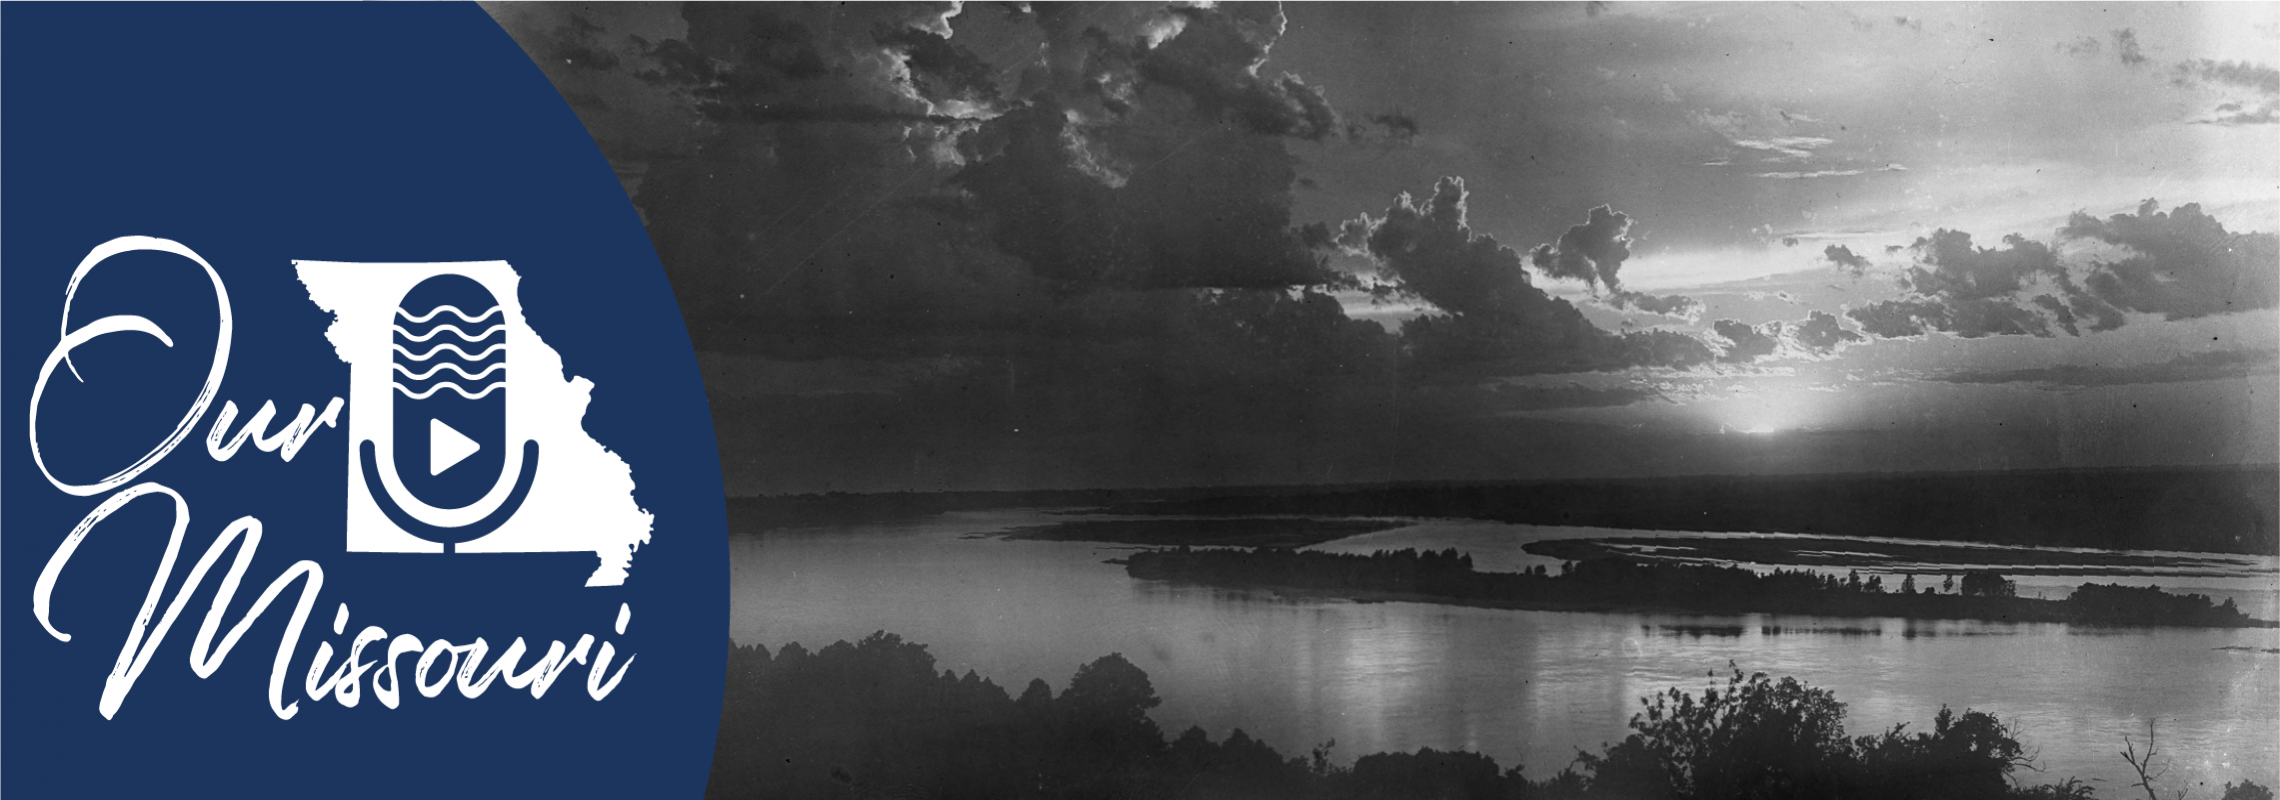 Missouri River Sunset From Harley Point, ca. 1903, Boonville. [Maximilian E. Schmidt Photographs, P0001-A234]